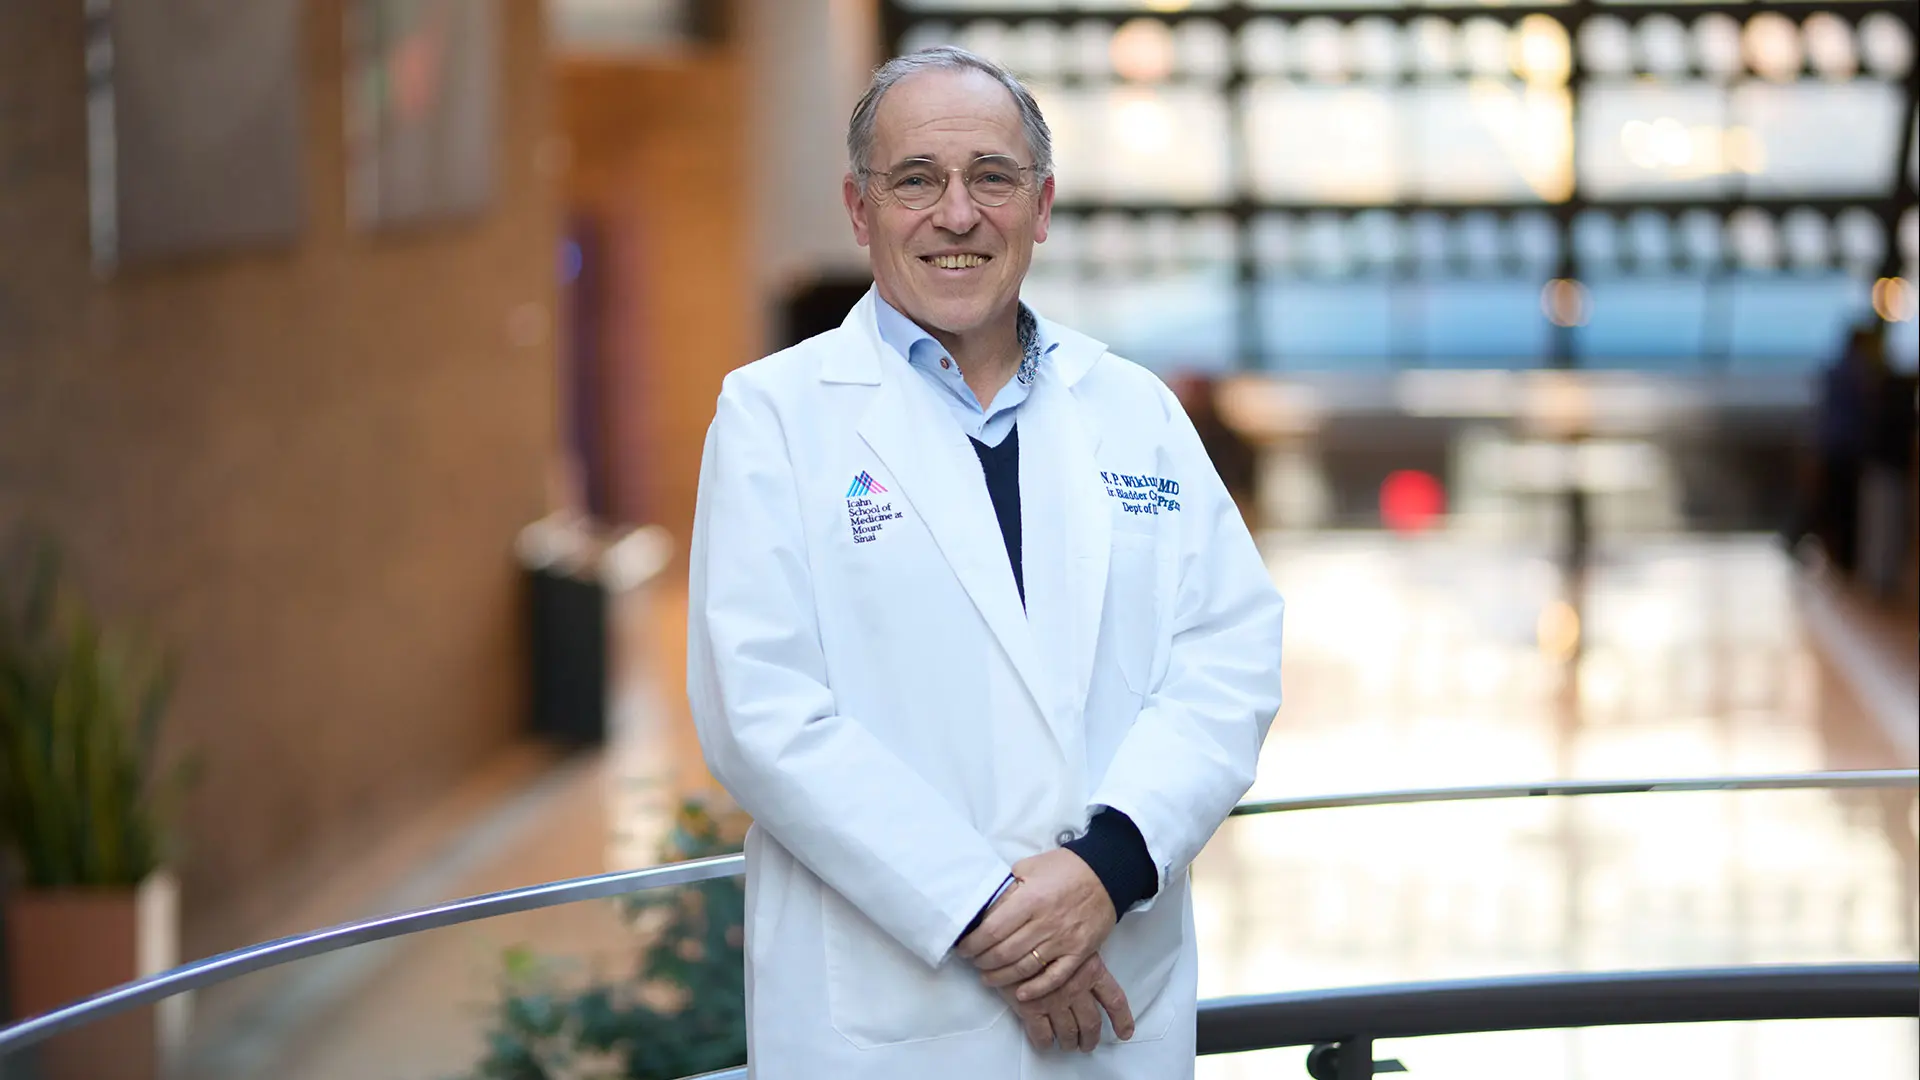 Peter Wiklund, MD, PhD, Professor of Urology in the Department of Urology at the Icahn School of Medicine at Mount Sinai and Director of the Bladder Cancer Program at the Mount Sinai Health System 